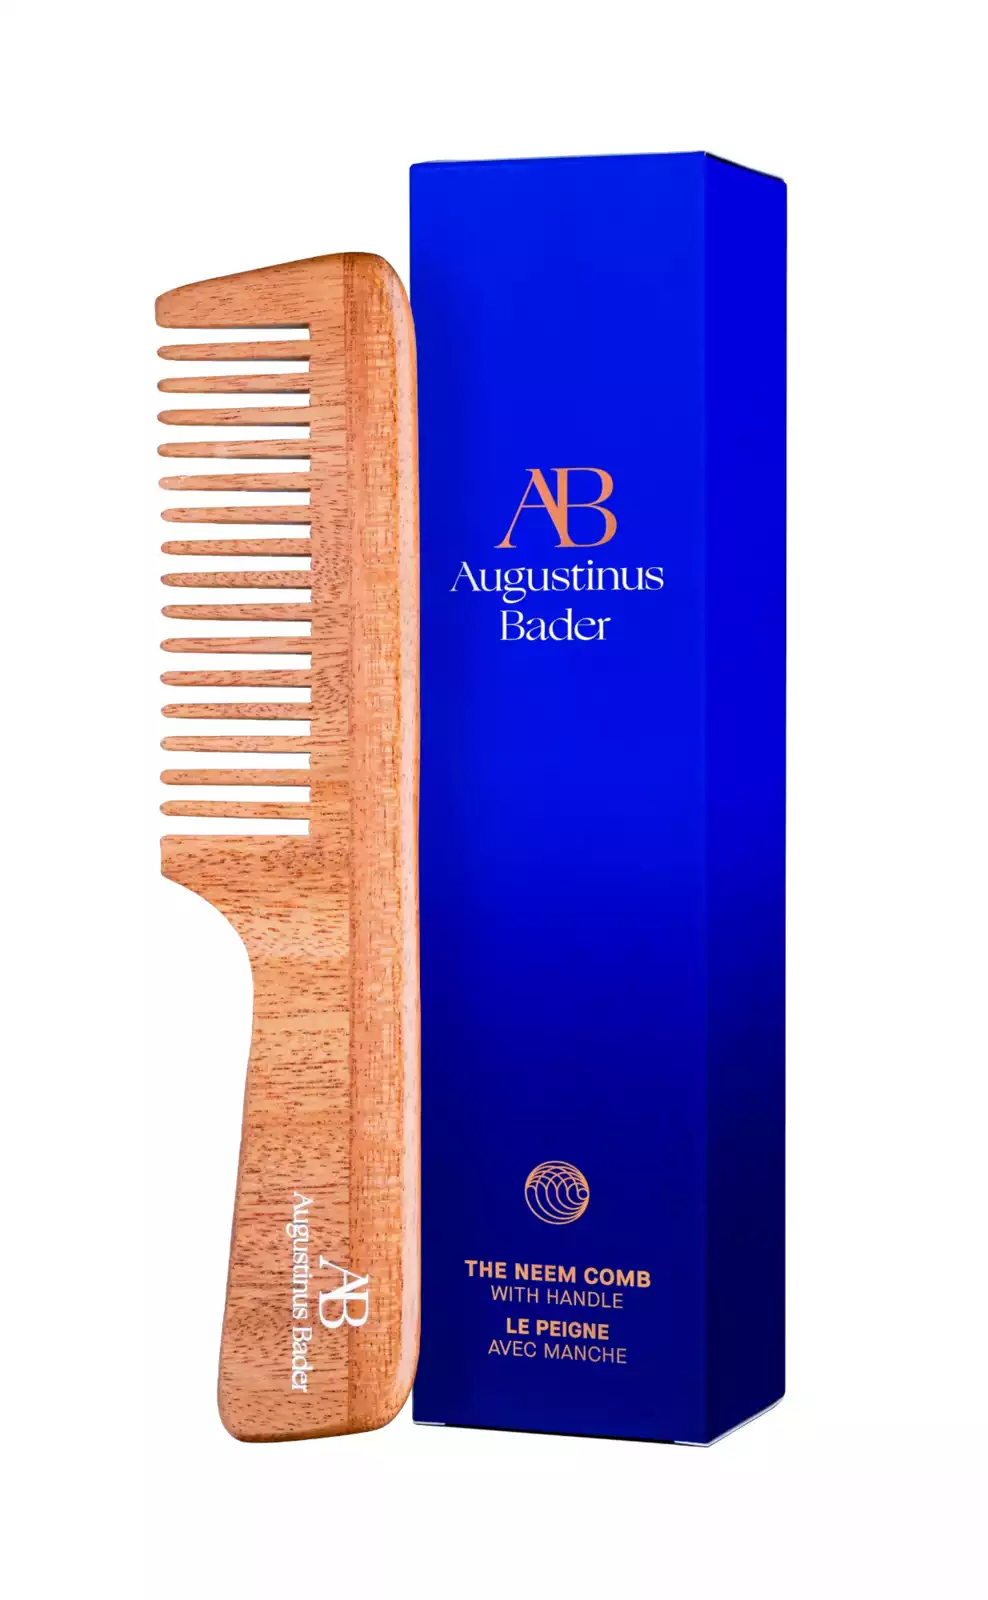 - The Neem Comb without Handle